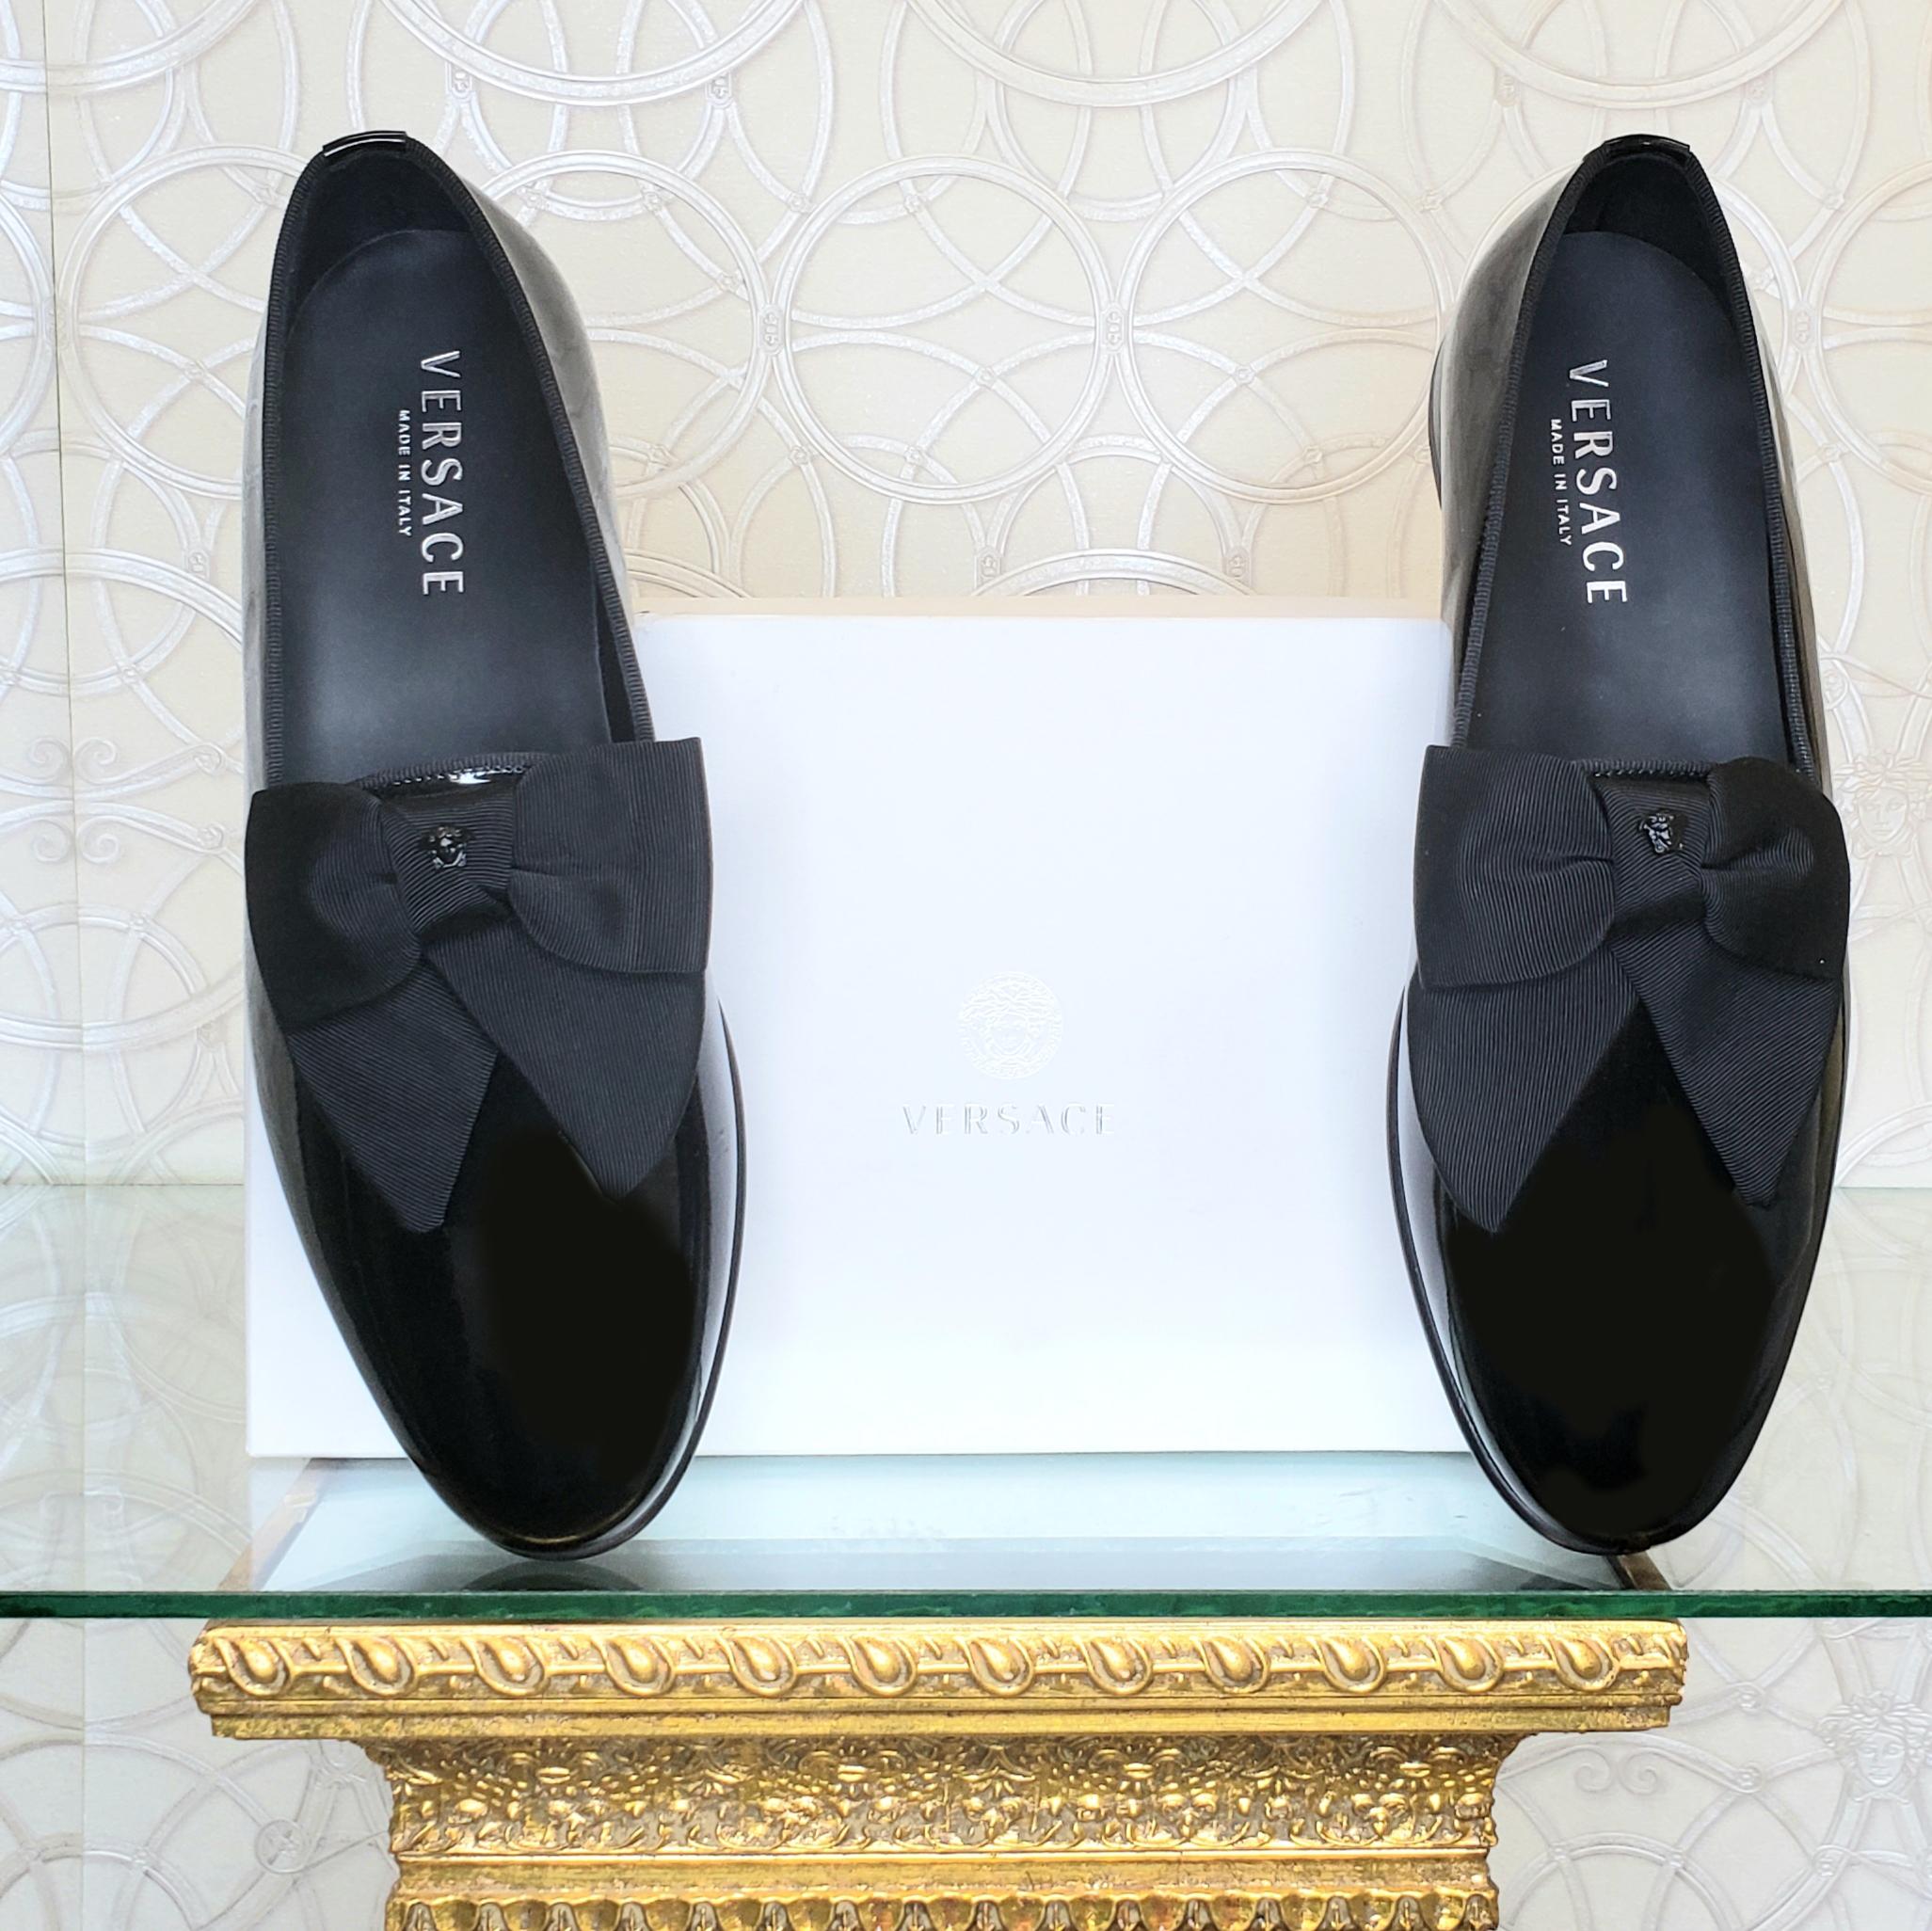    VERSACE



BLACK PATENT LEATHER LOAFER SHOES



Content: patent leather


Lining: 100% leather


Made in Italy


      Italian Size is 43 - US 10
       
Brand new. Comes with Versace box and Versace signature Dust Bag.

 100% authentic guarantee